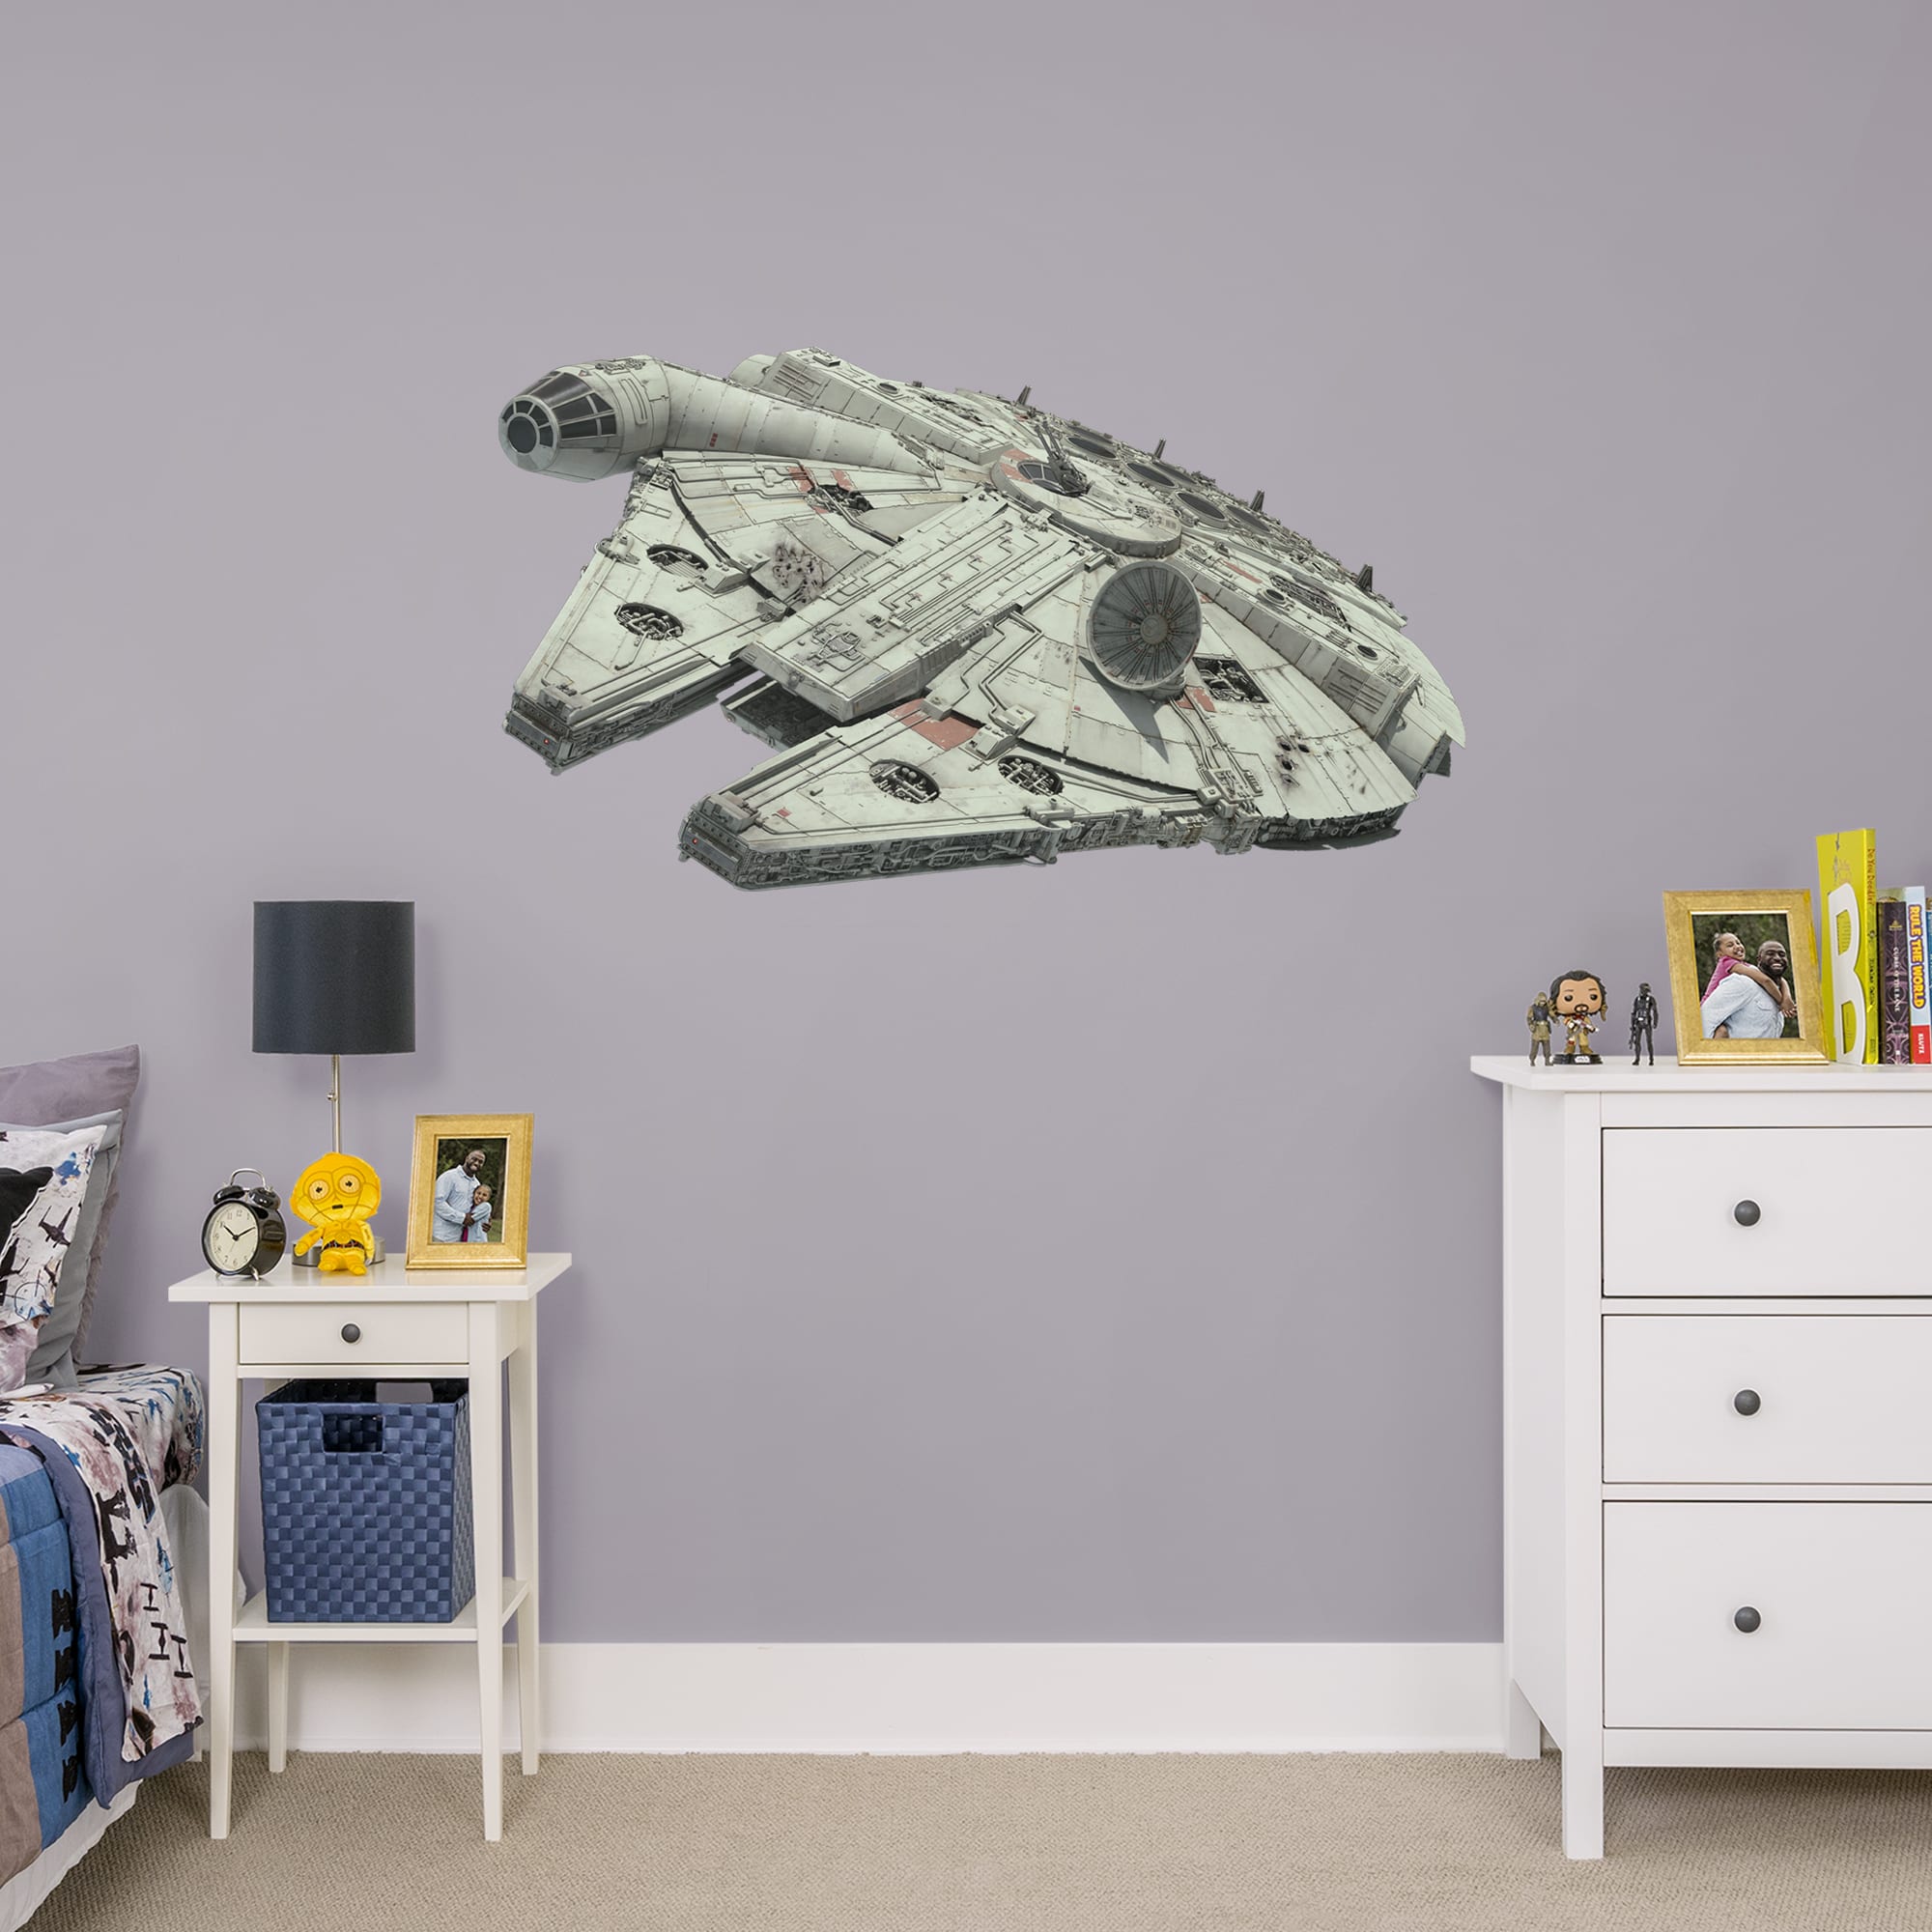 Millennium Falcon - Star Wars: The Rise of Skywalker - Officially Licensed Removable Wall Decal Giant Ship + 2 Decals (51"W x 29